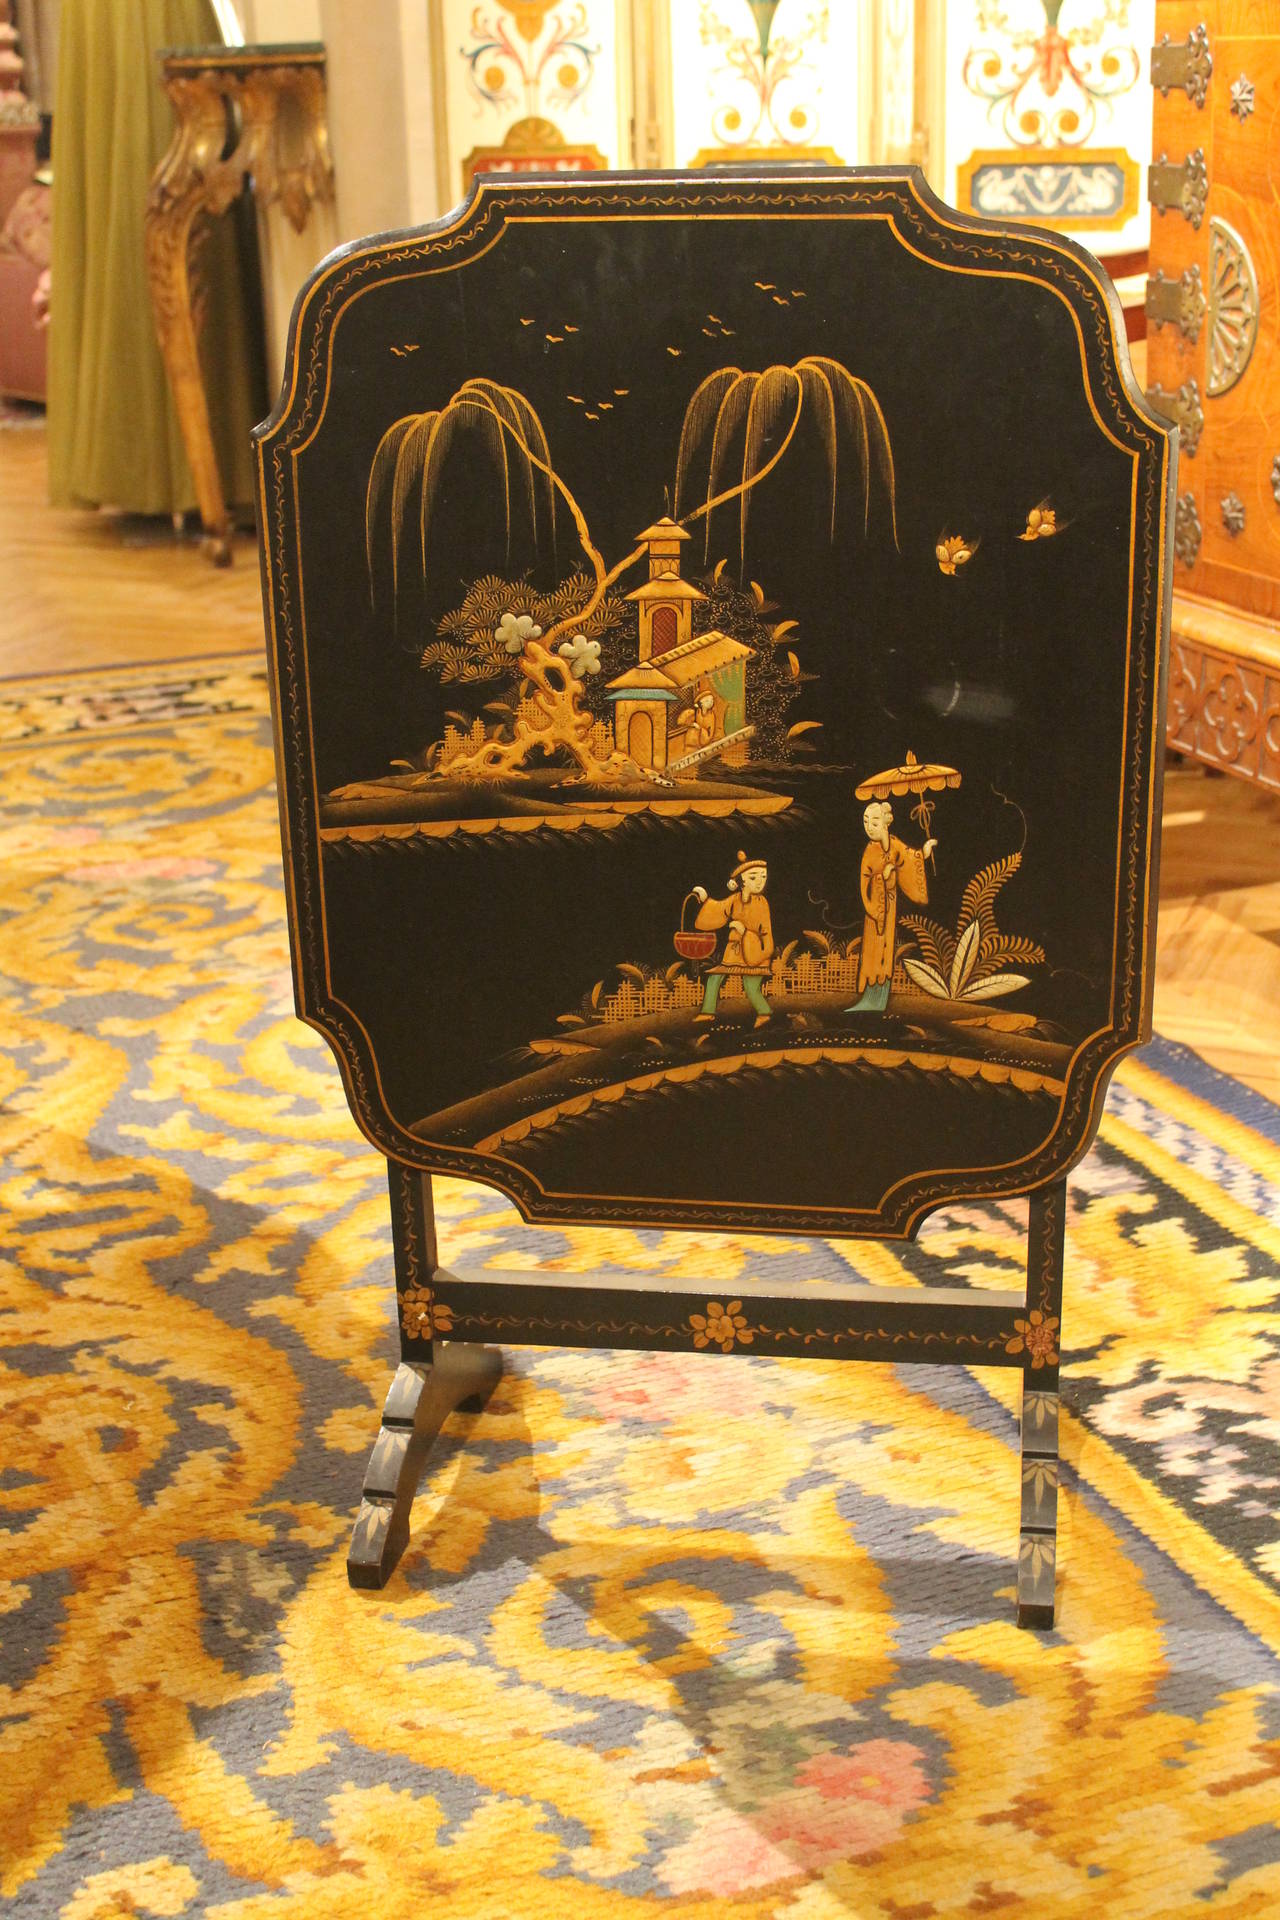 A very fine black lacquered chinoiserie folding table. Beautiful shape and chinoiserie patterns. Very convenient size. Great use for a small dining table, coffee table, game table or side table. Height 51cm, Width 62cm, Depth 51 cm or 3 cm